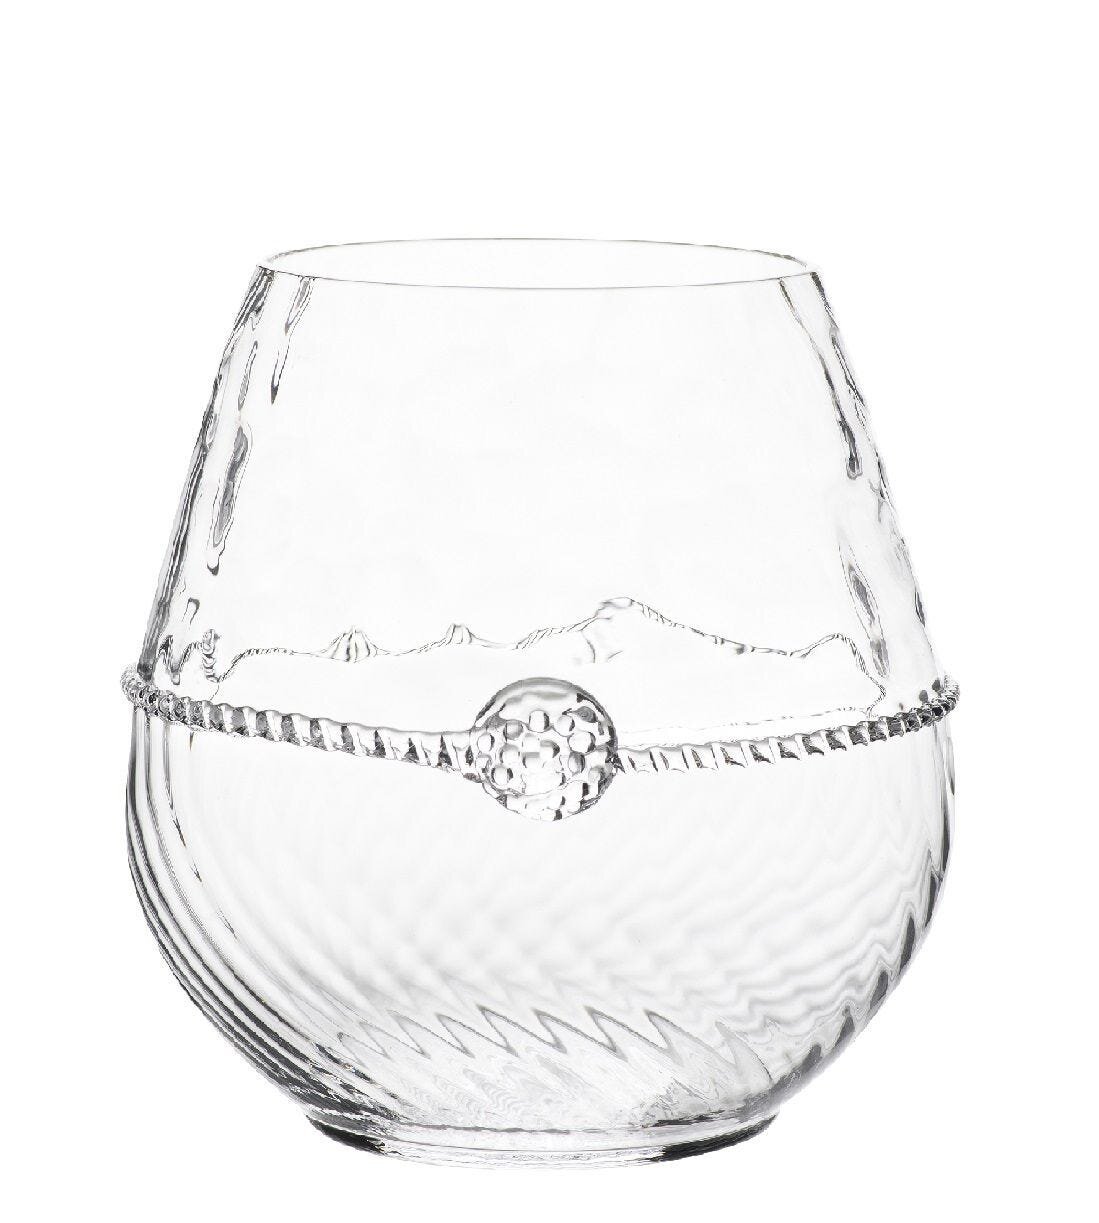 Vermont Stemless Wine Glasses - Set of 2 at M.LaHart & Co.